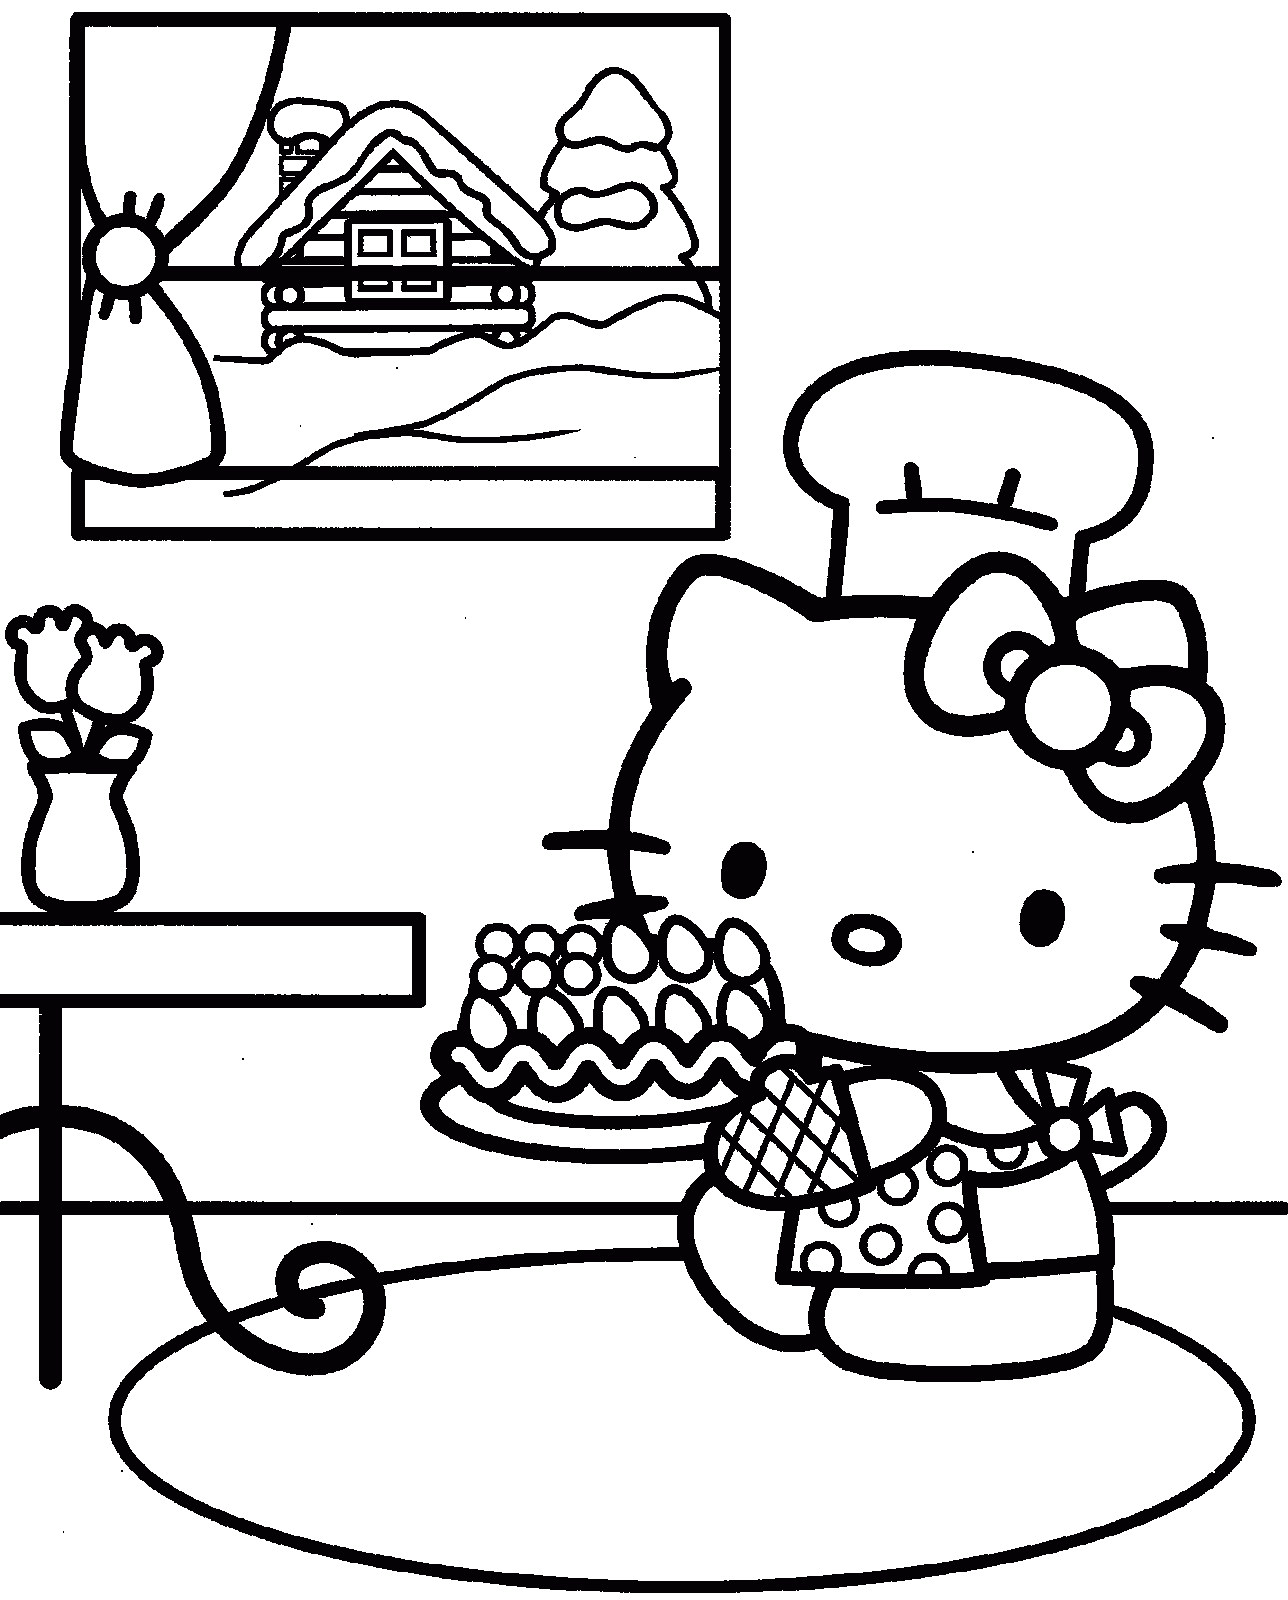 hello kitty free coloring pages transmissionpress october 2010 pages coloring kitty free hello 